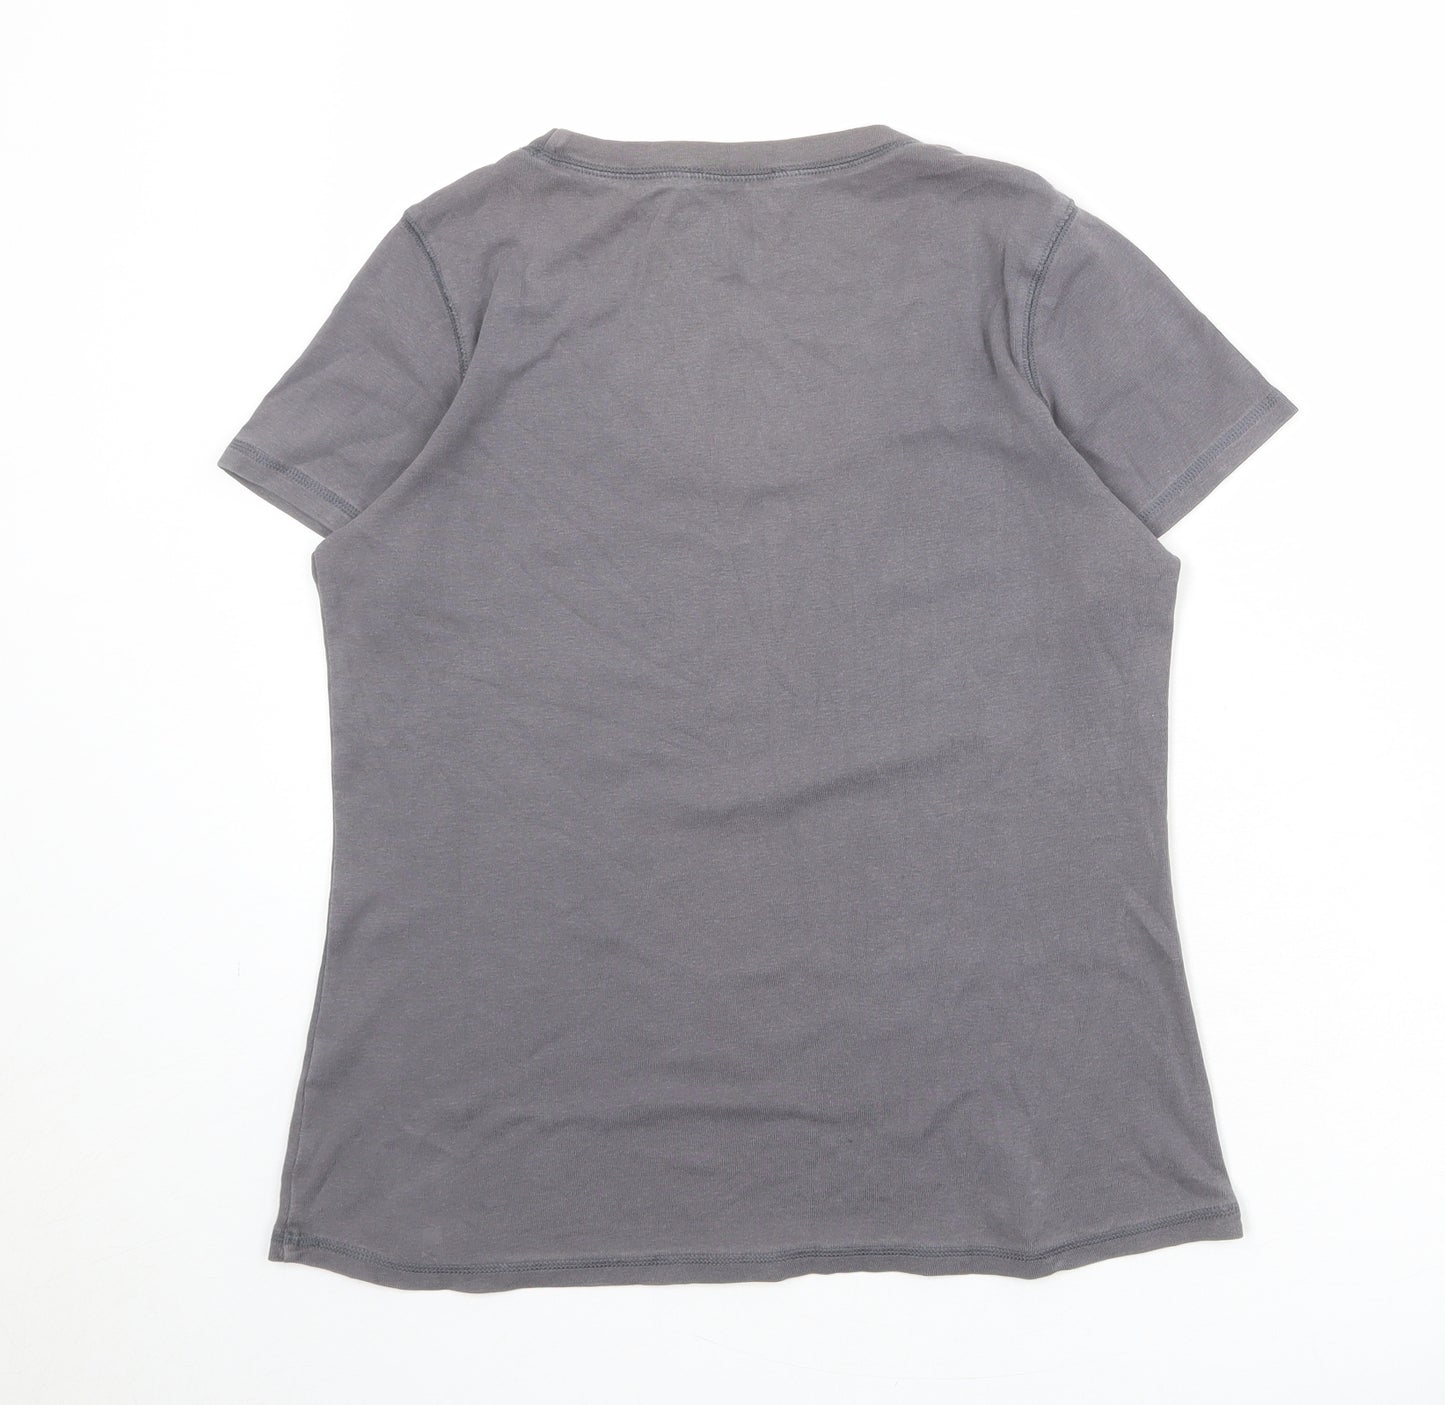 Marks and Spencer Womens Grey 100% Cotton Basic T-Shirt Size 16 Scoop Neck